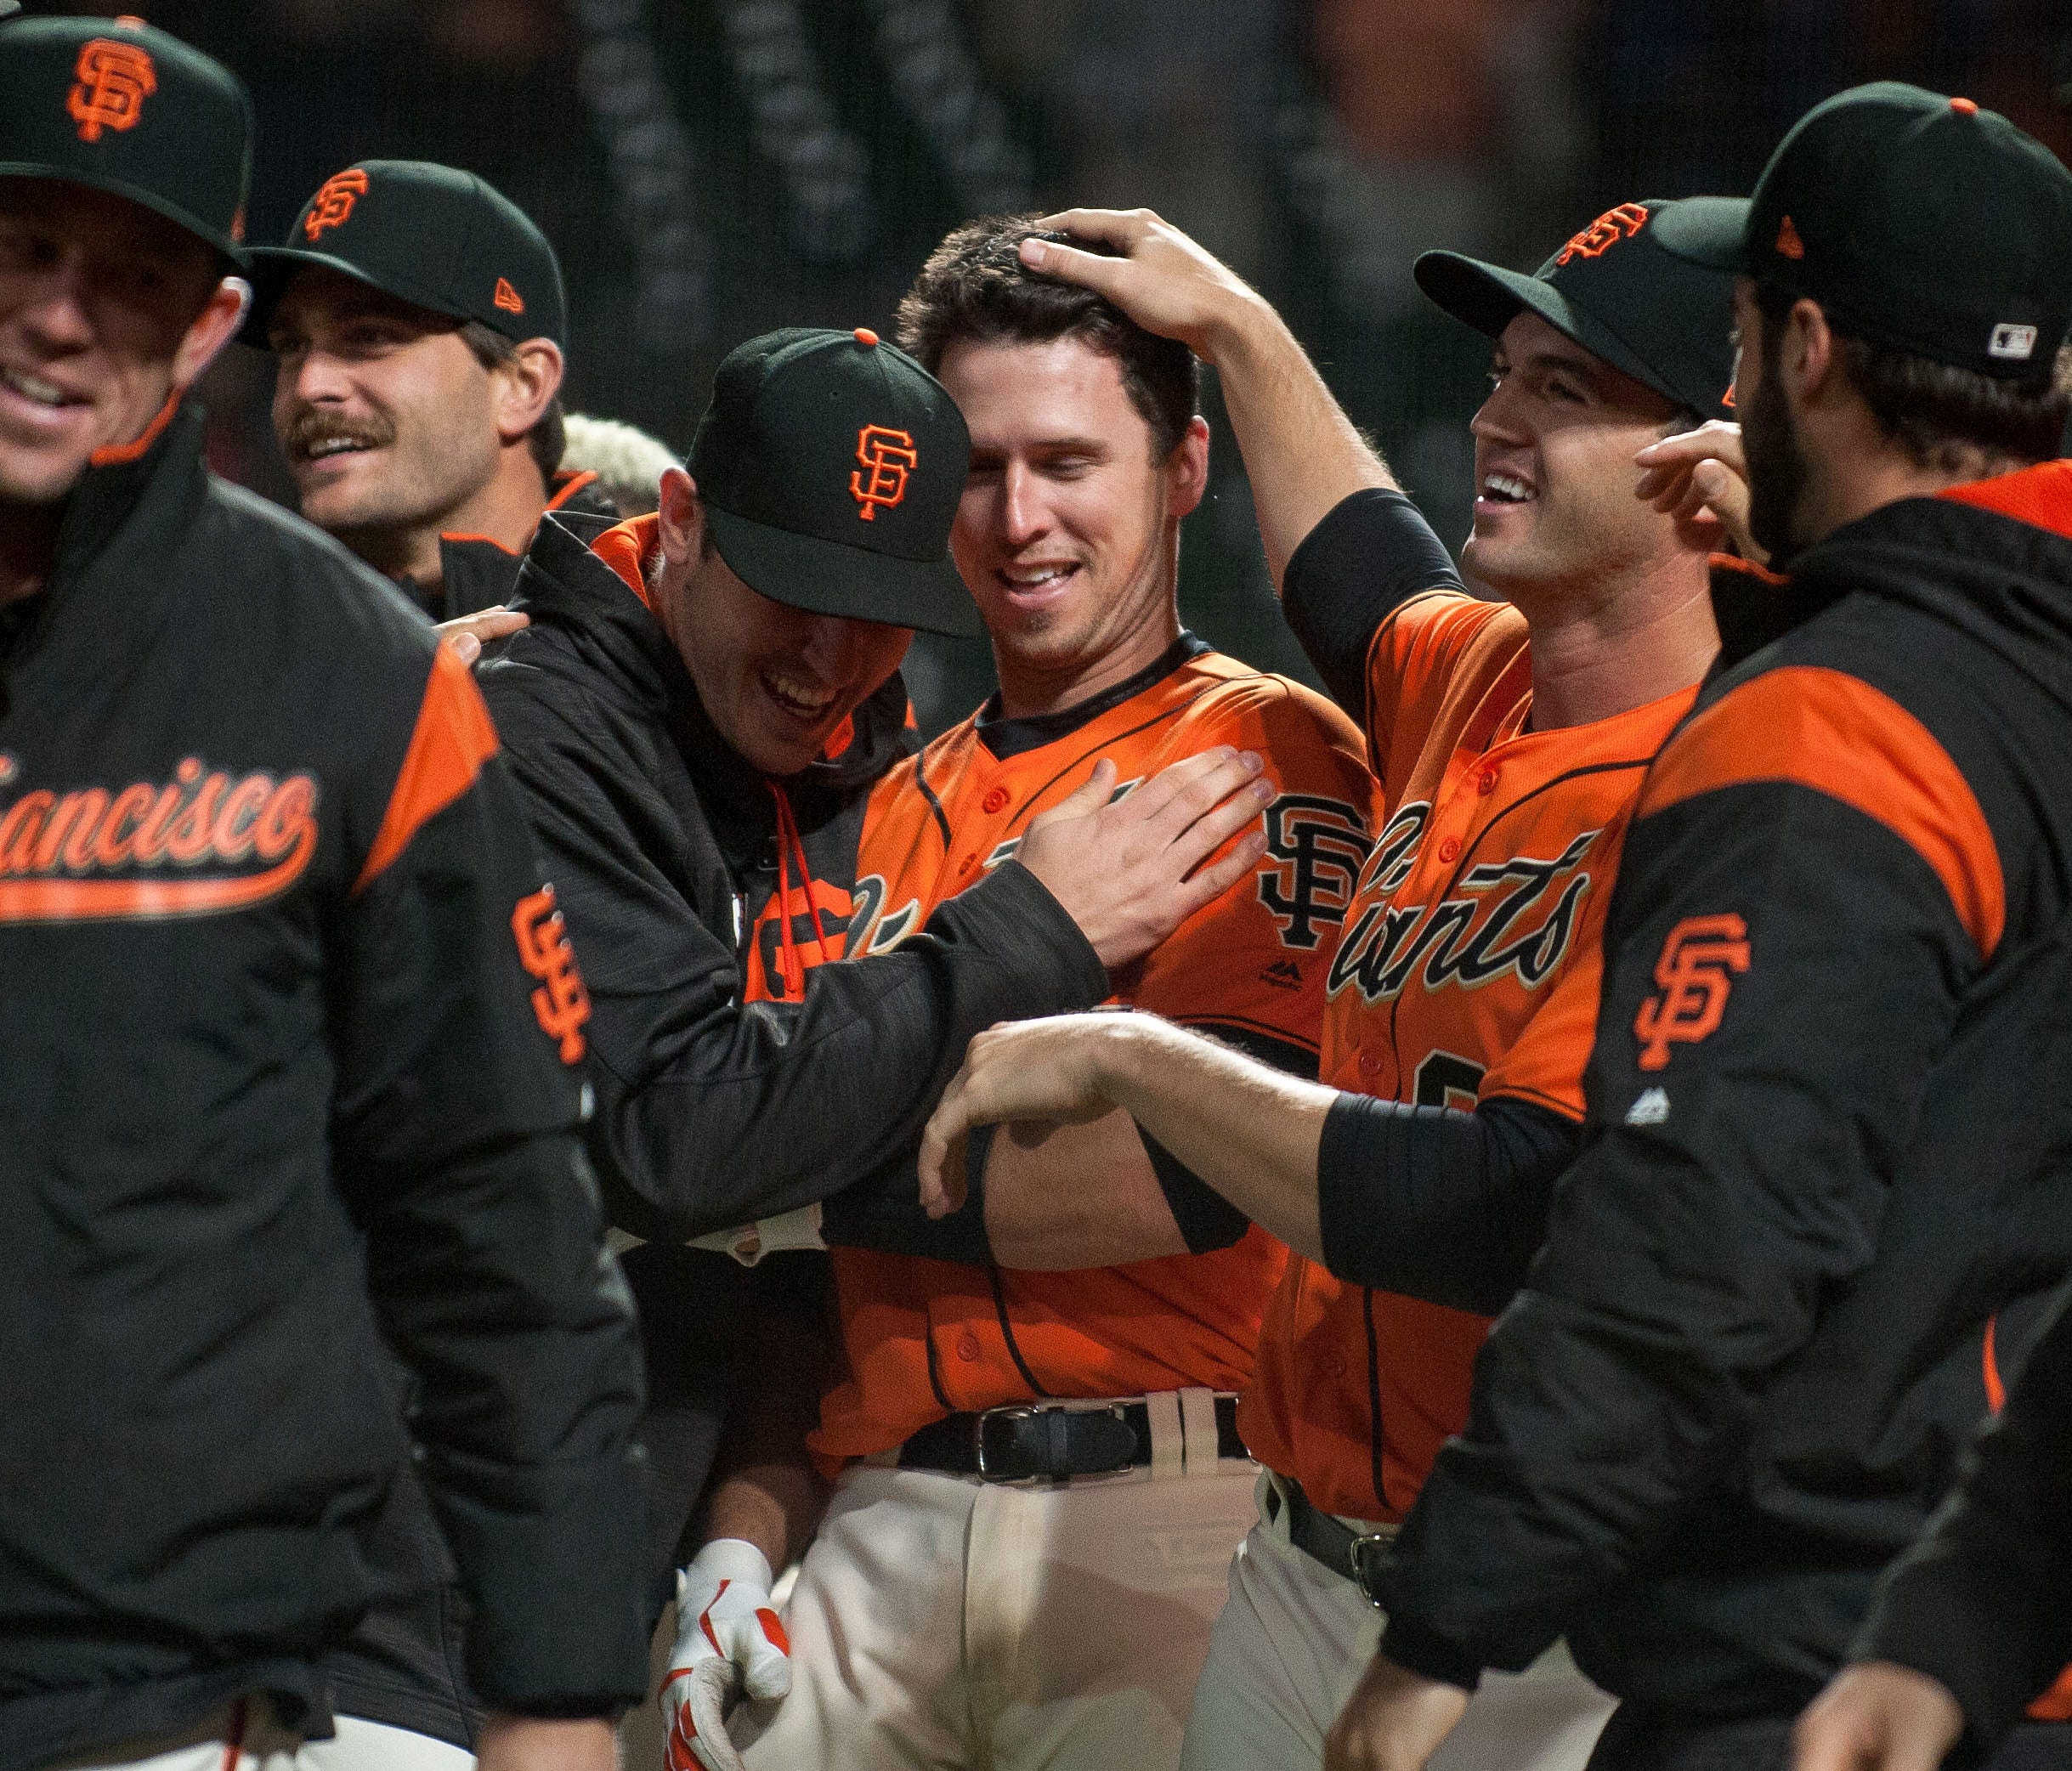 San Francisco Giants catcher Buster Posey (28) celebrates with teammates at home plate after hitting a walk-off home run during the 17th inning against the Cincinnati Reds.